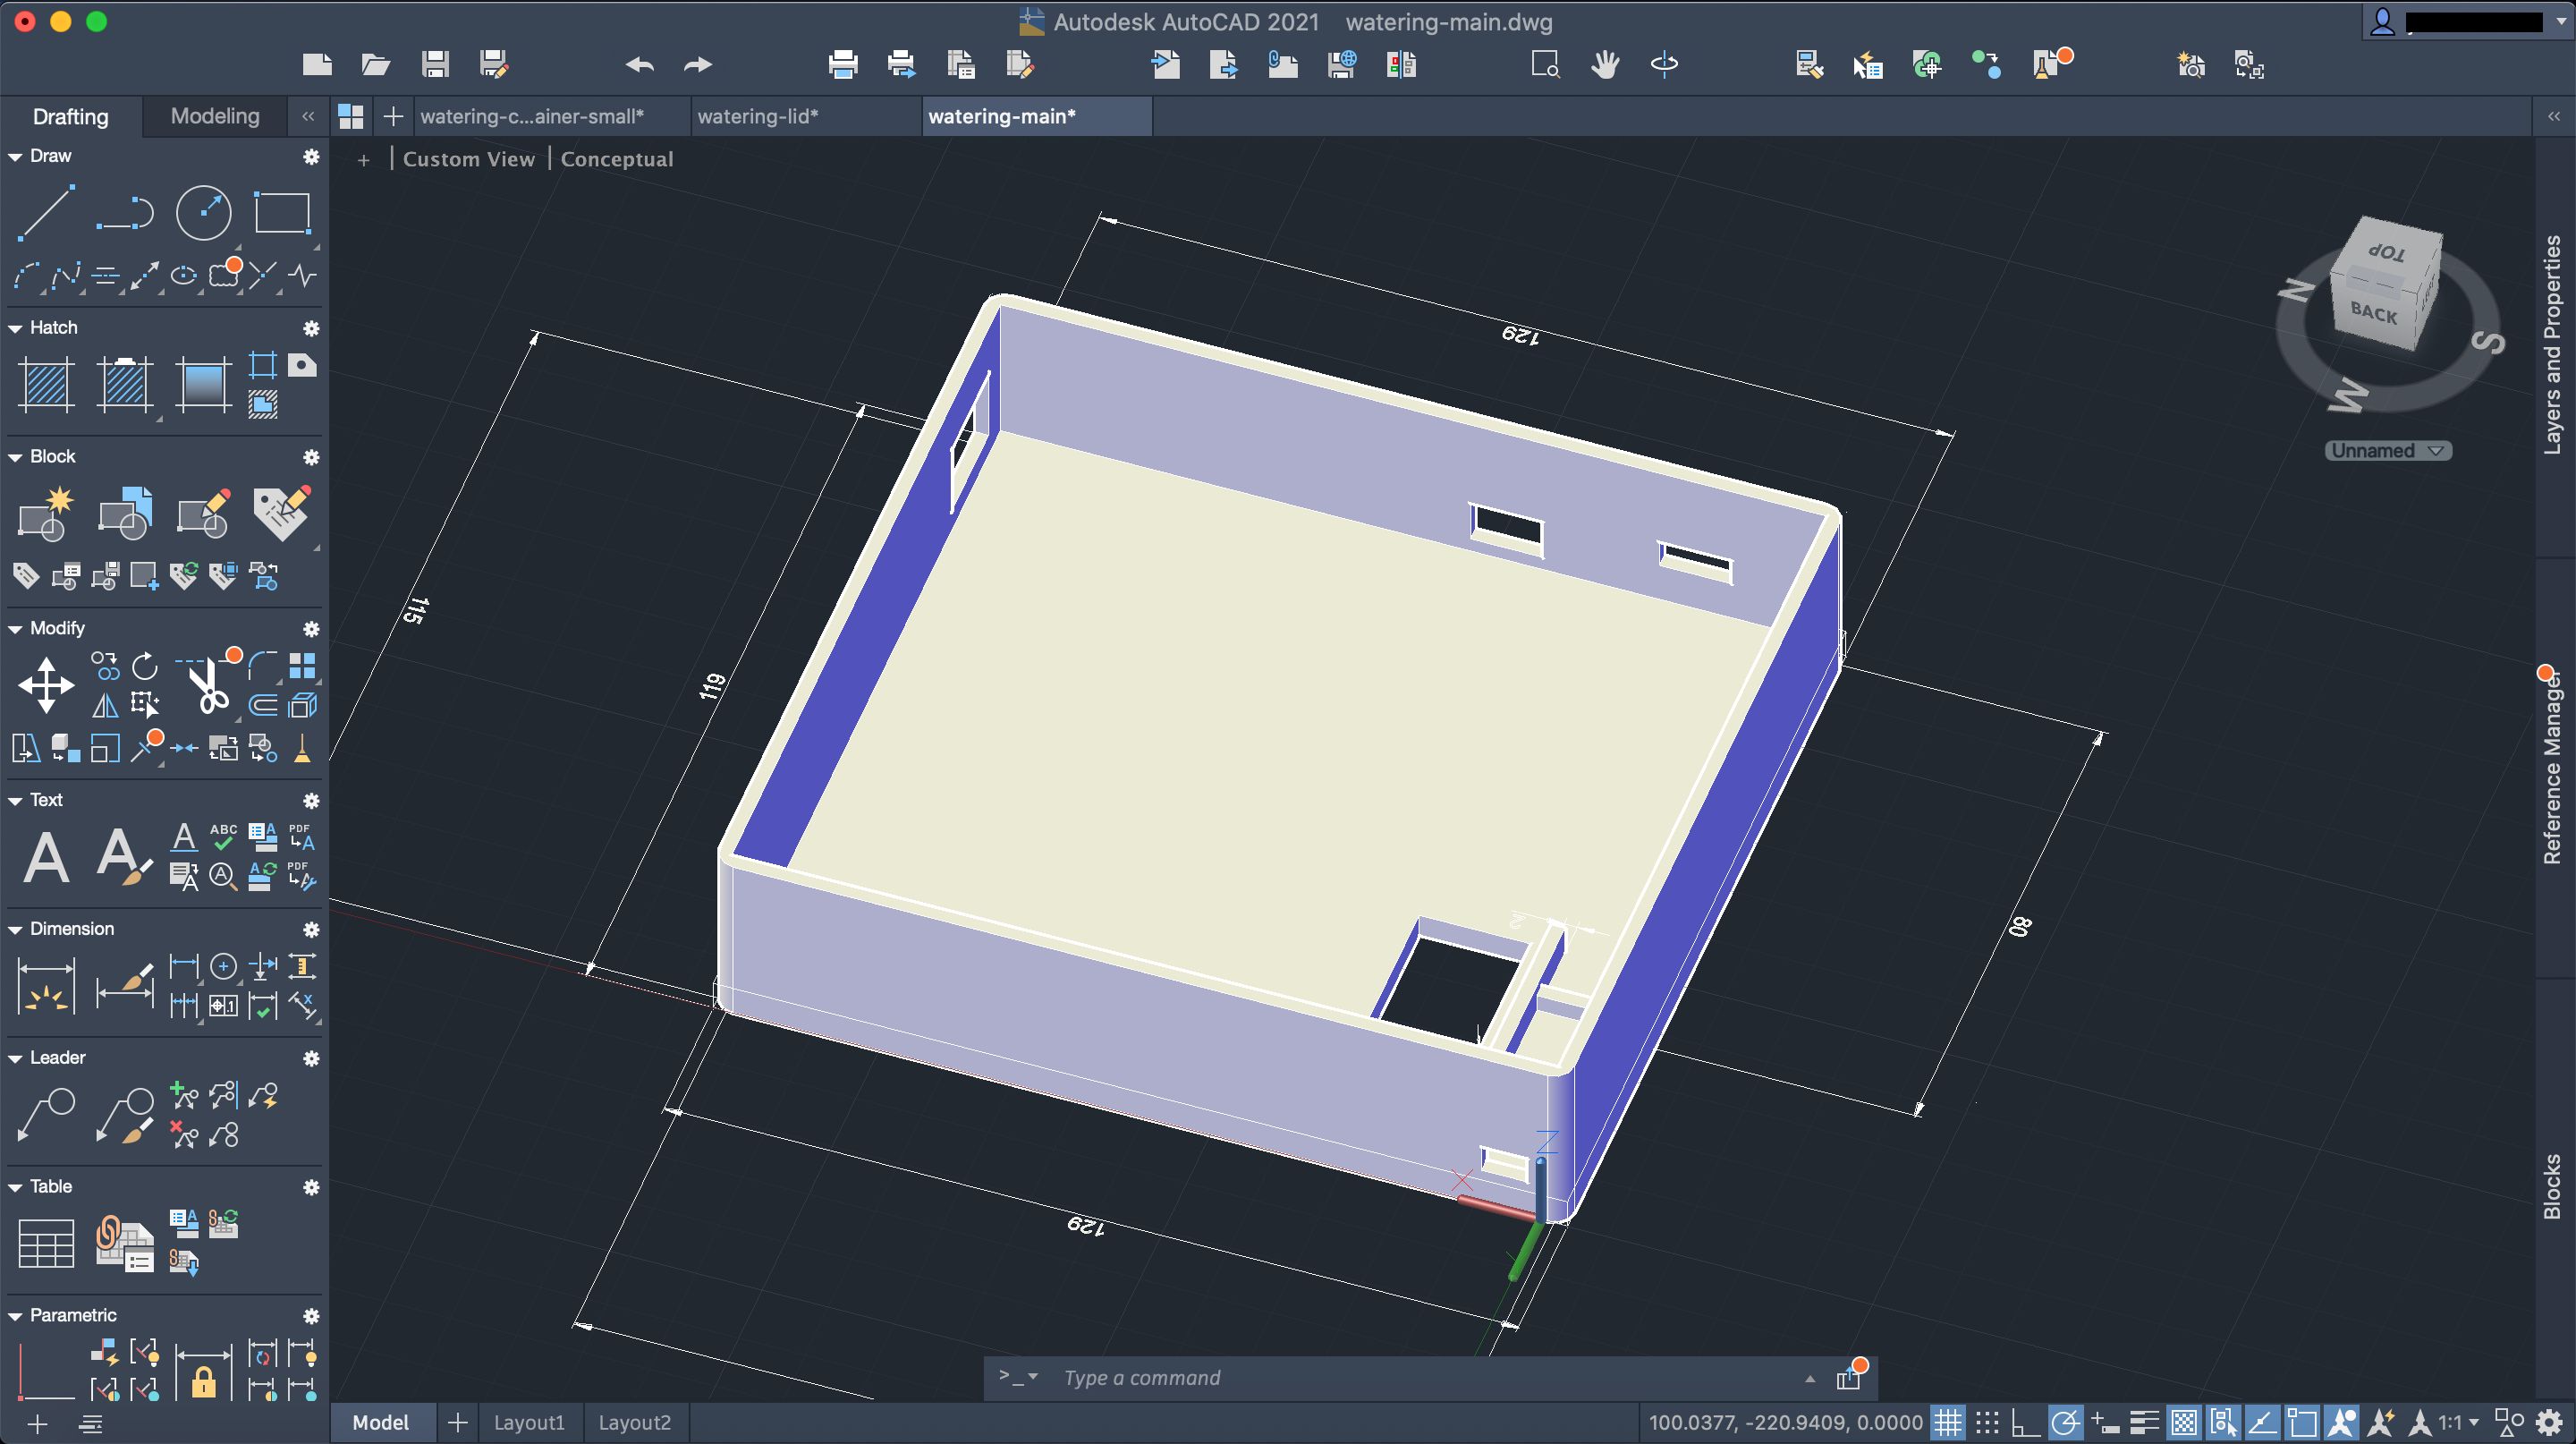 An image showcasing the main section in Autodesk AutoCAD